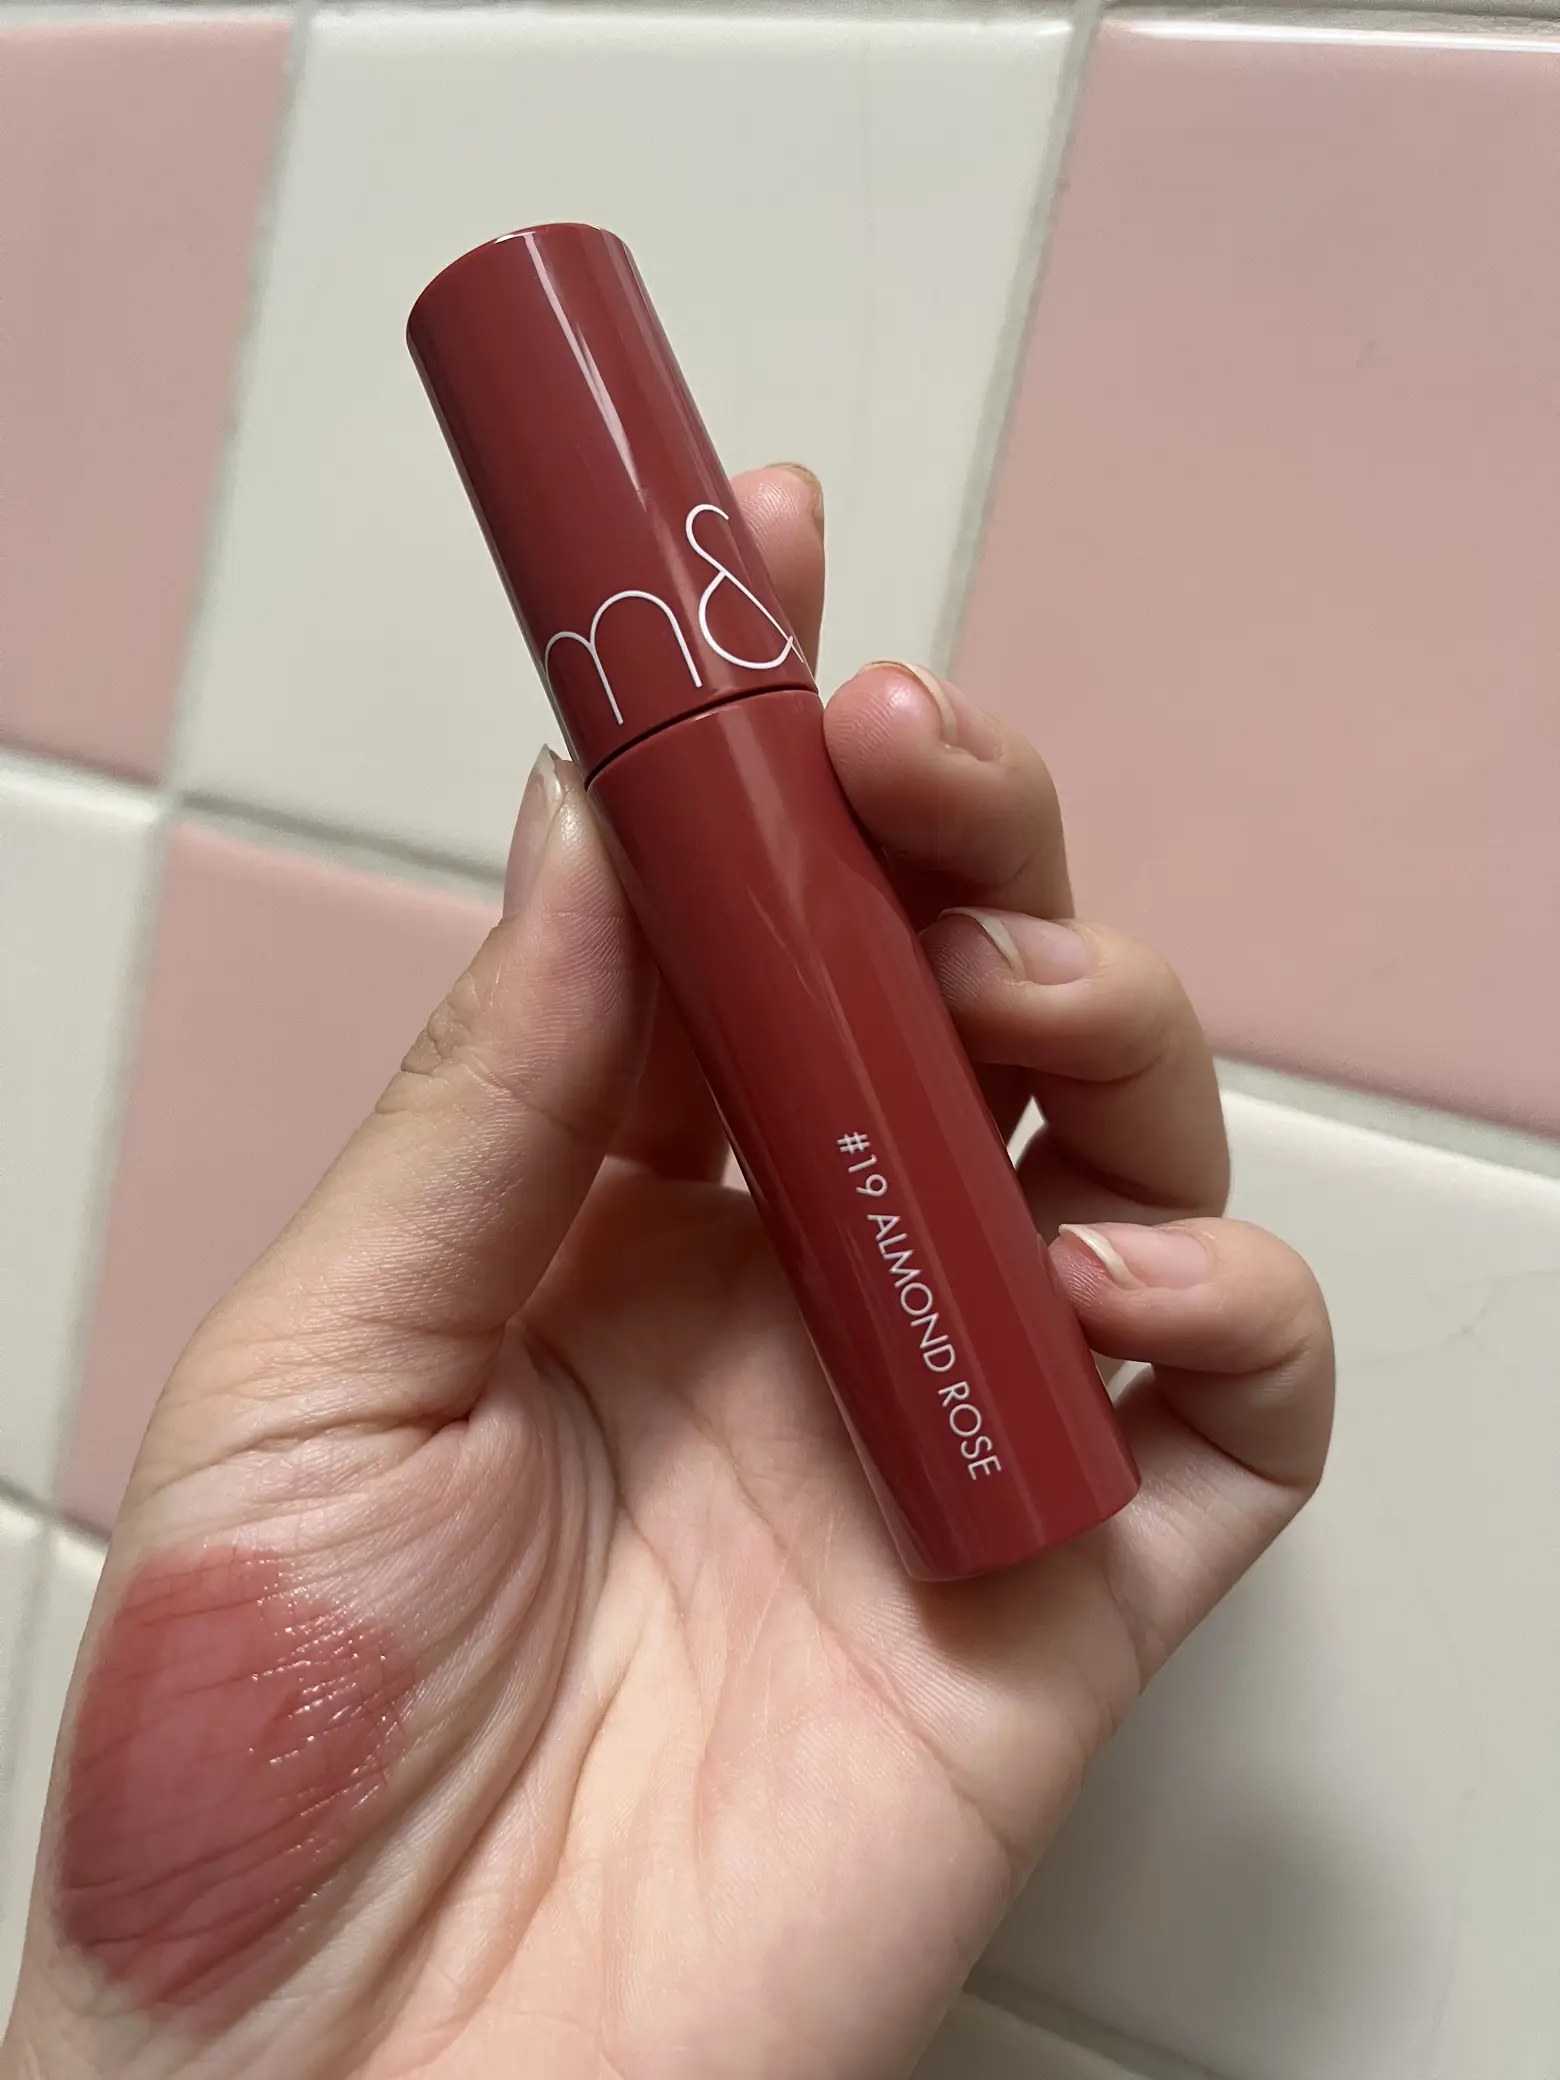 Rom&nd Juicy lasting Tint #19, Gallery posted by Nicha